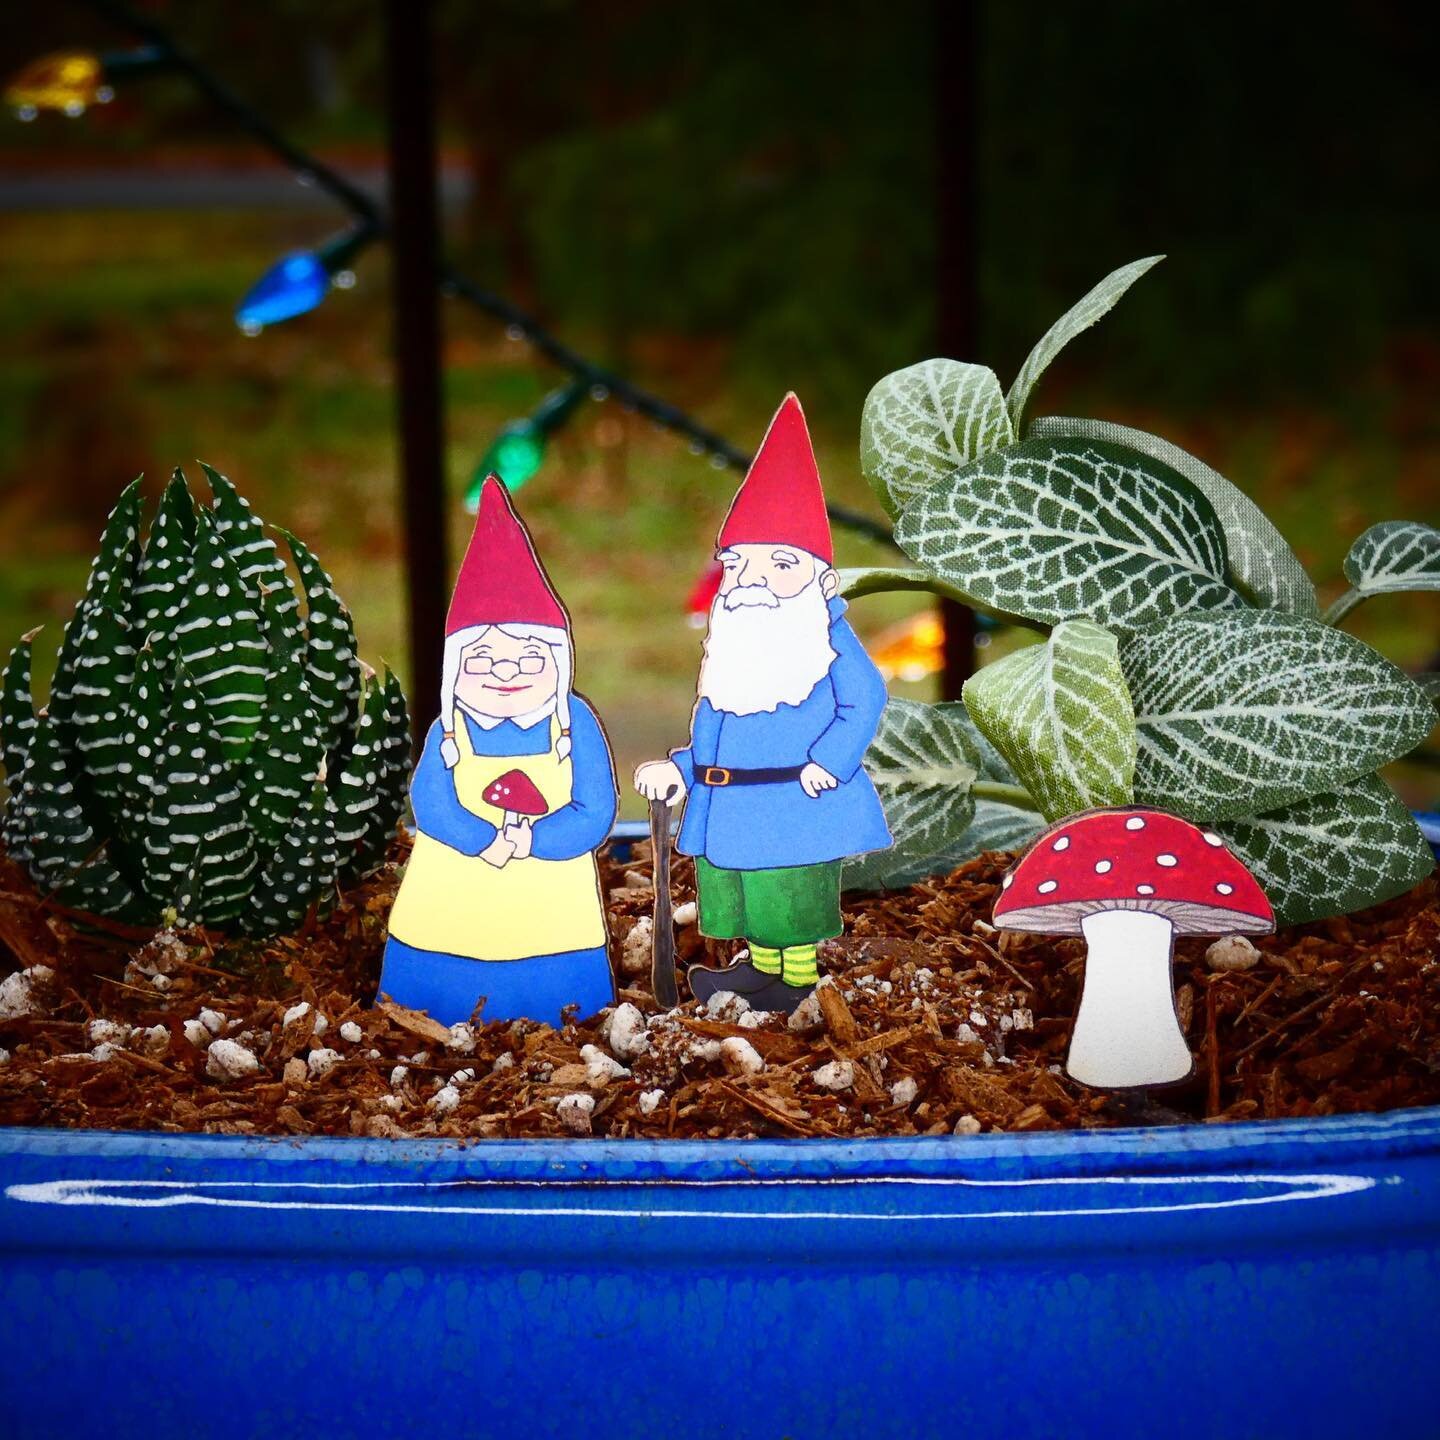 🤩🪴It&rsquo;s Fancy Plants Friday! And it&rsquo;s gonna be Hygggggggge&hellip;🌱🤩

🍄 There&rsquo;s no place like gnomes to feature mushroom-red toques with accents of blue and stripy green. It&rsquo;s the fresh take on a classic look sure to make 